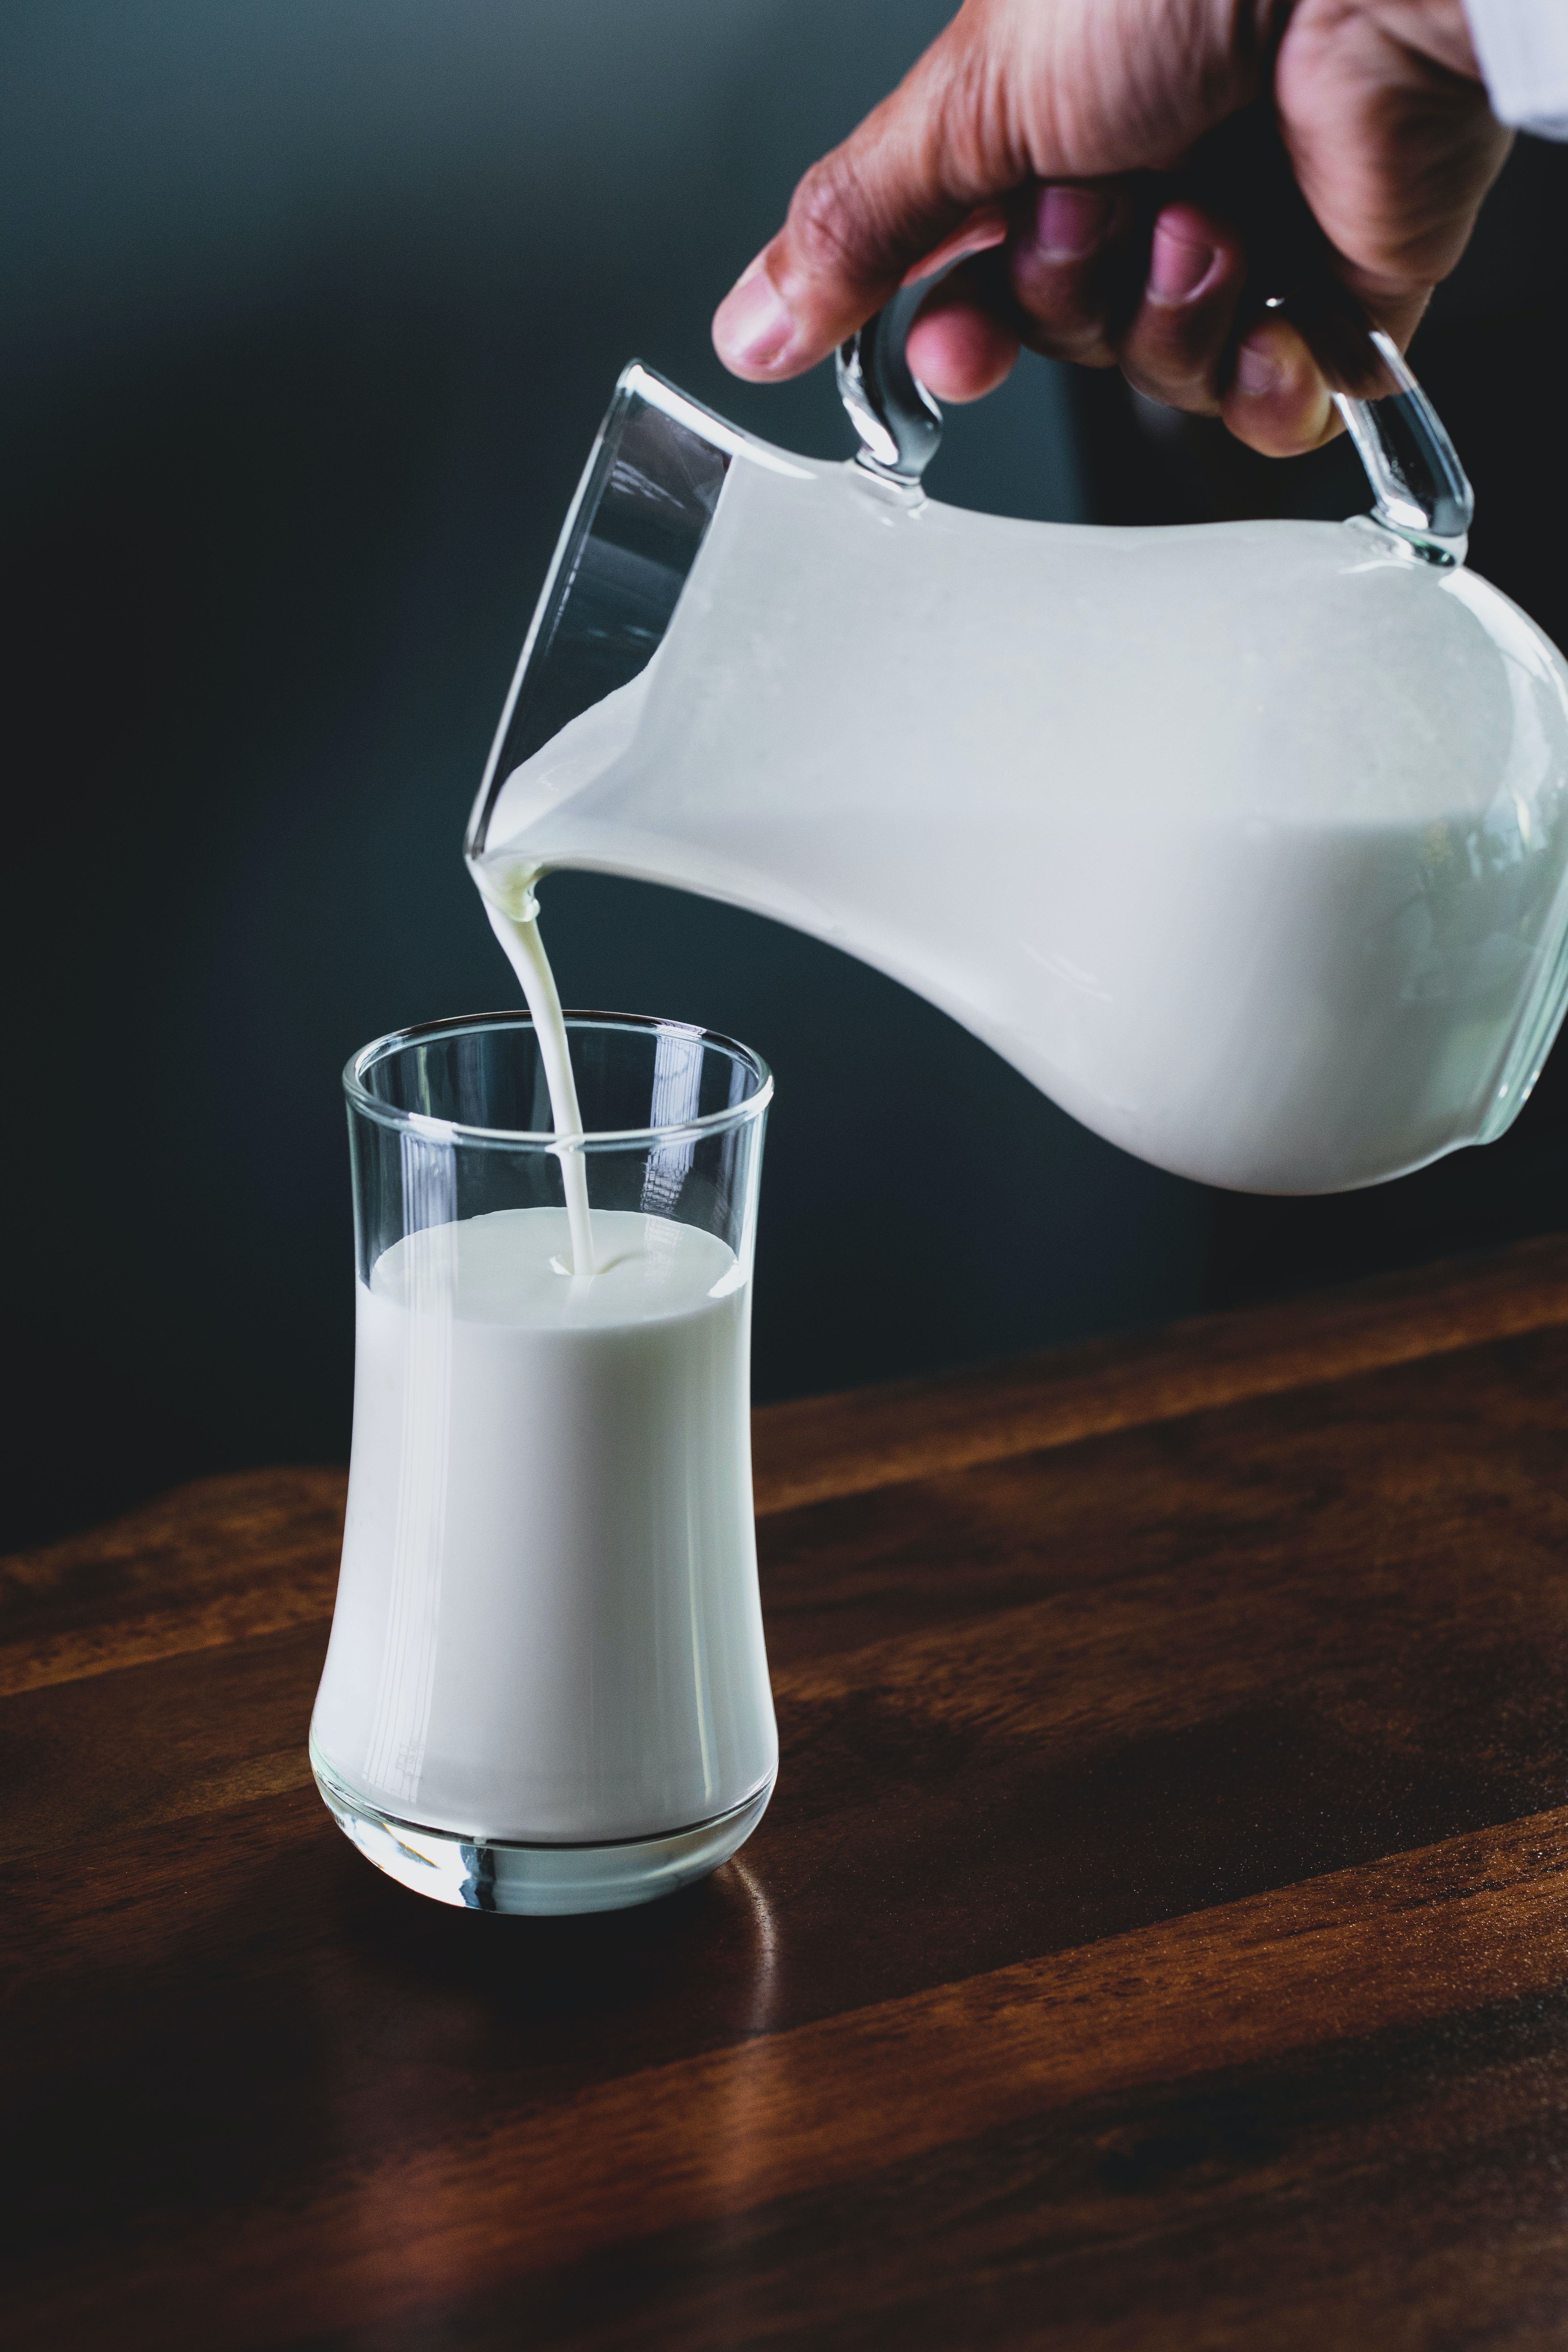 How is milk allergy diagnosed?